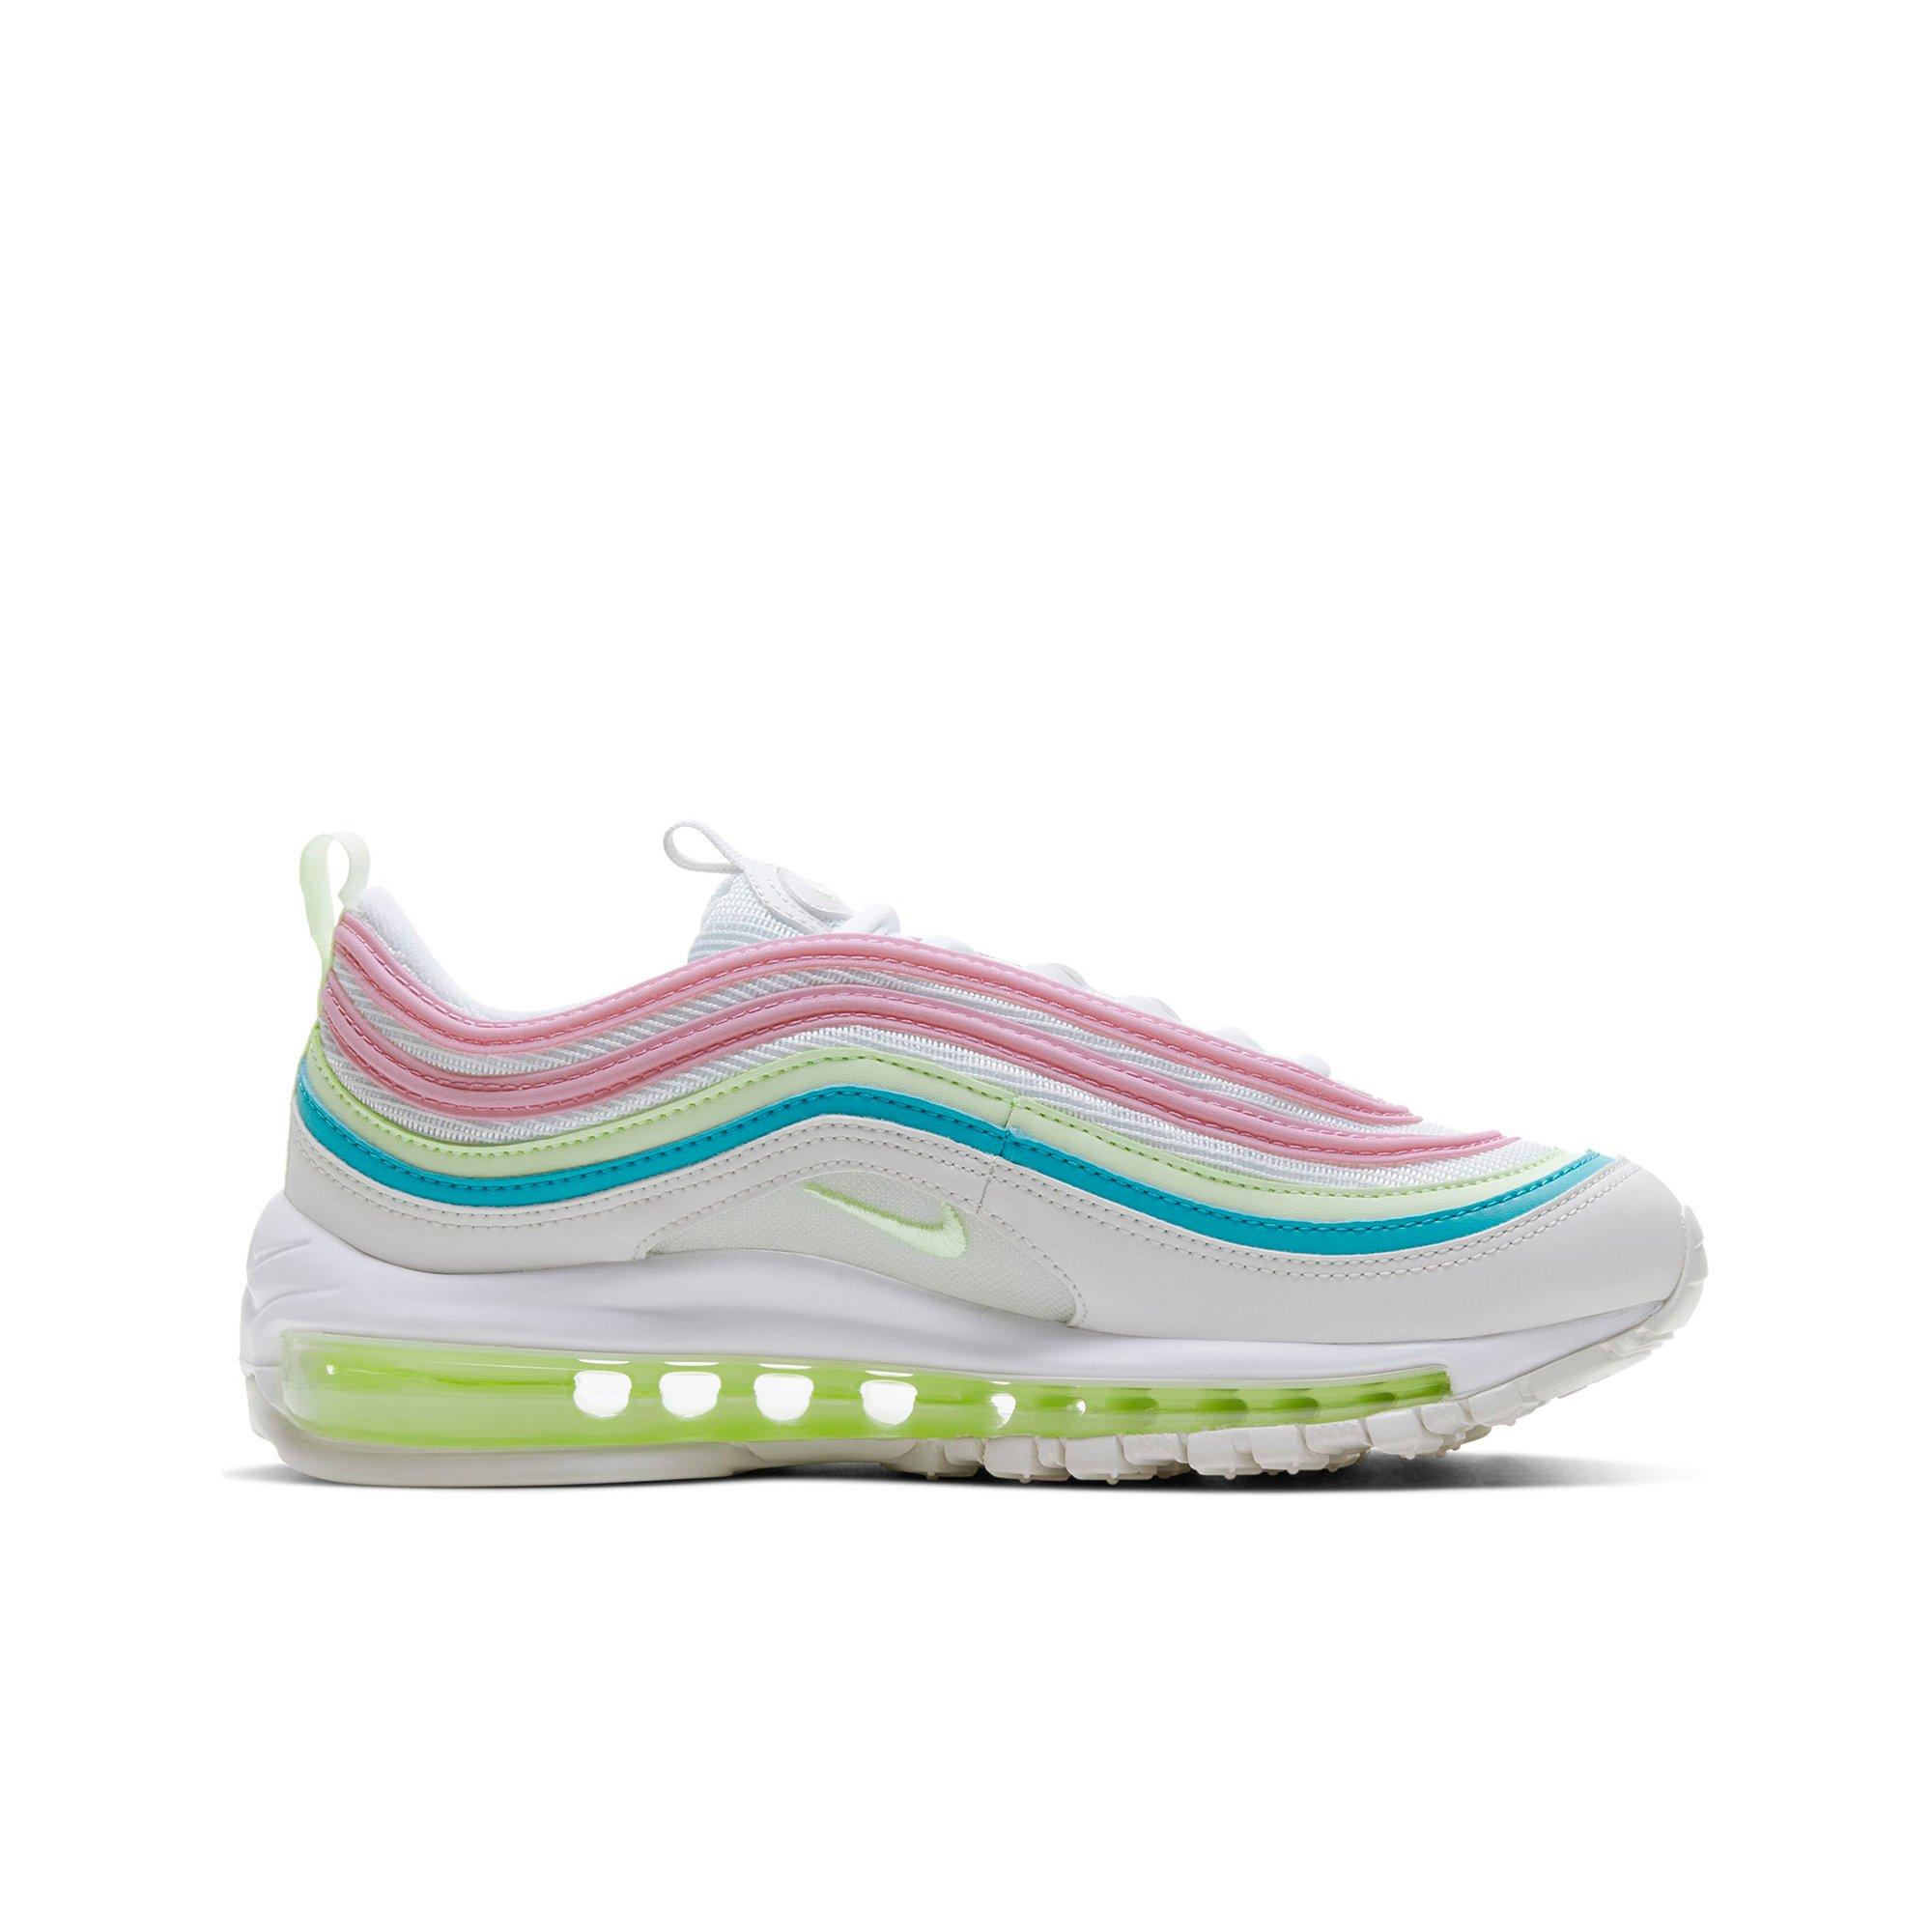 nike air max 97 pink and blue